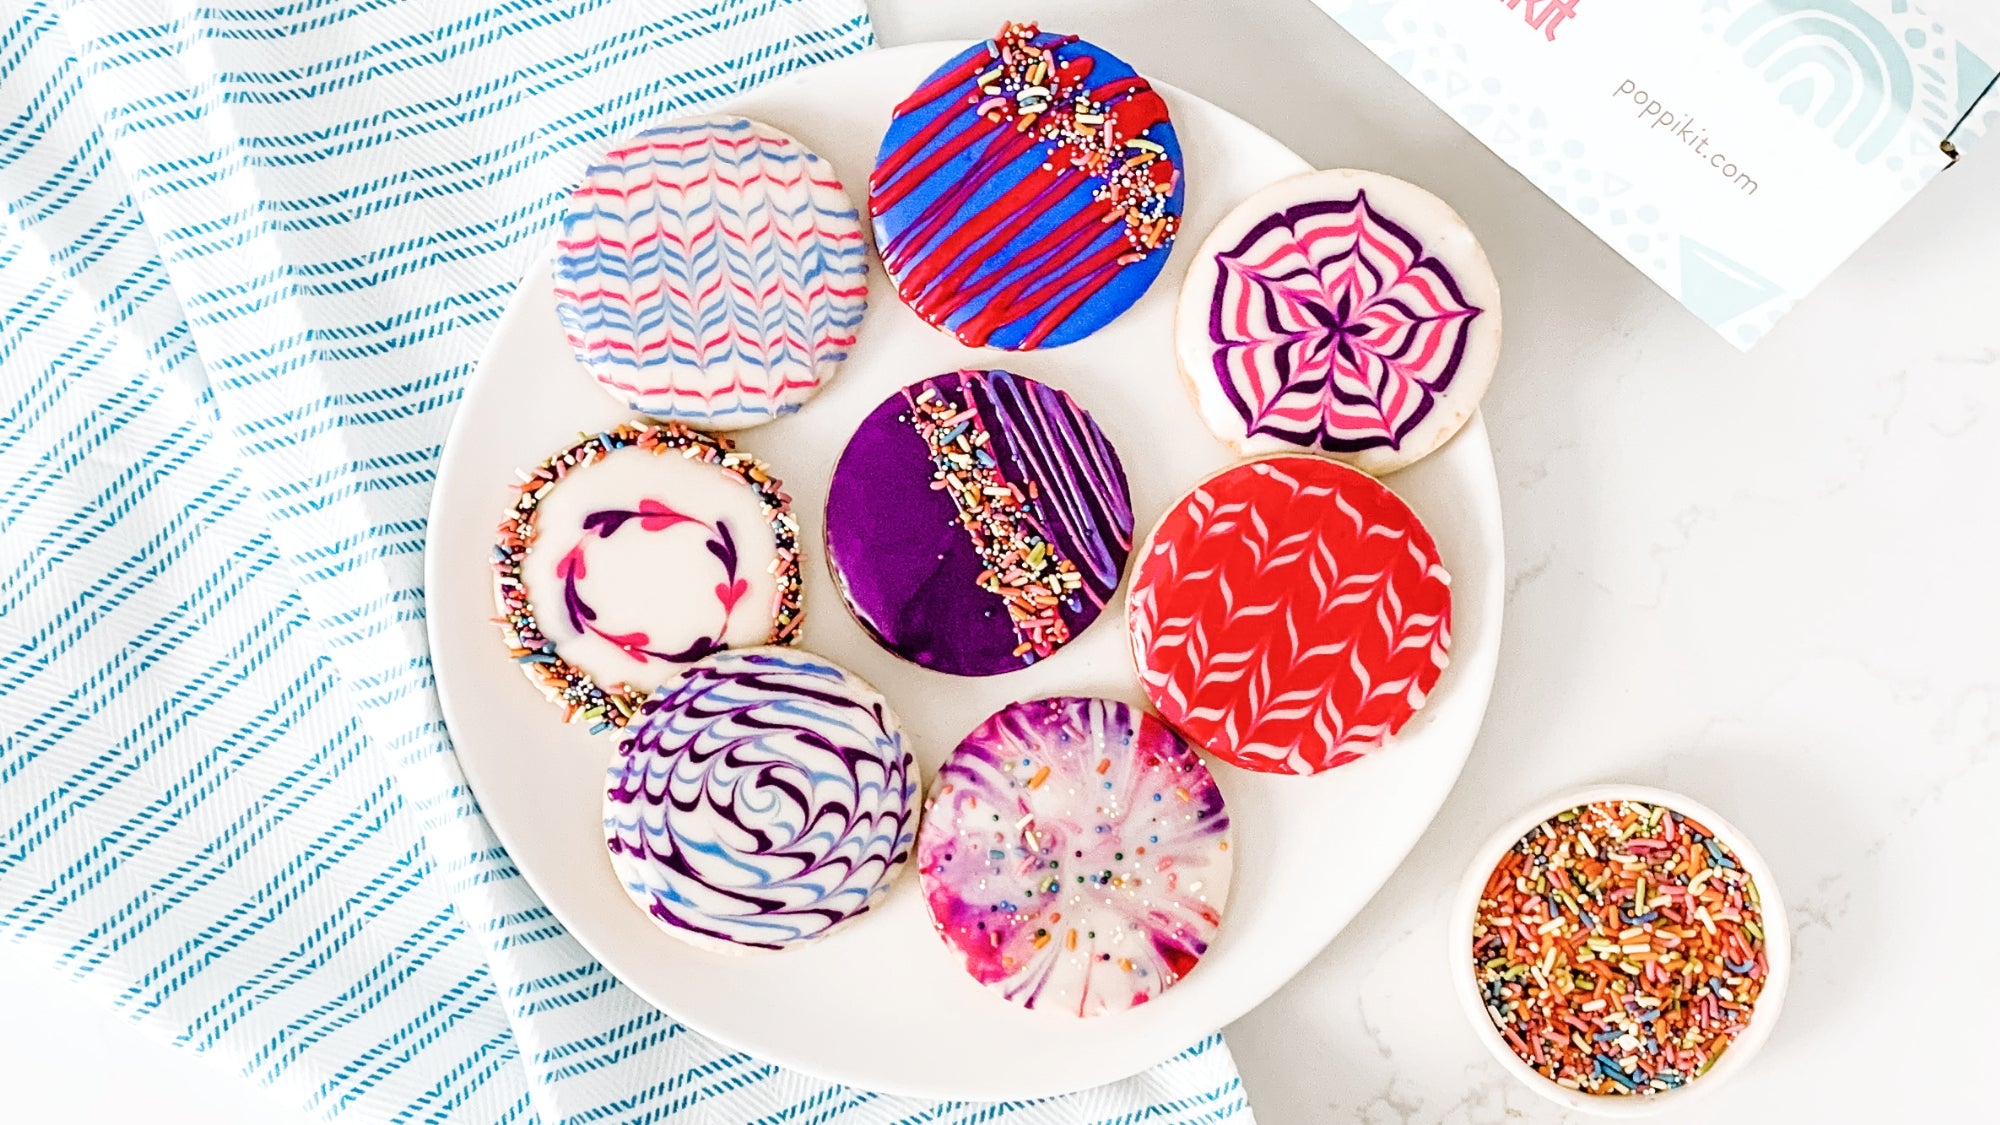 Virtual Cookie Decorating Class